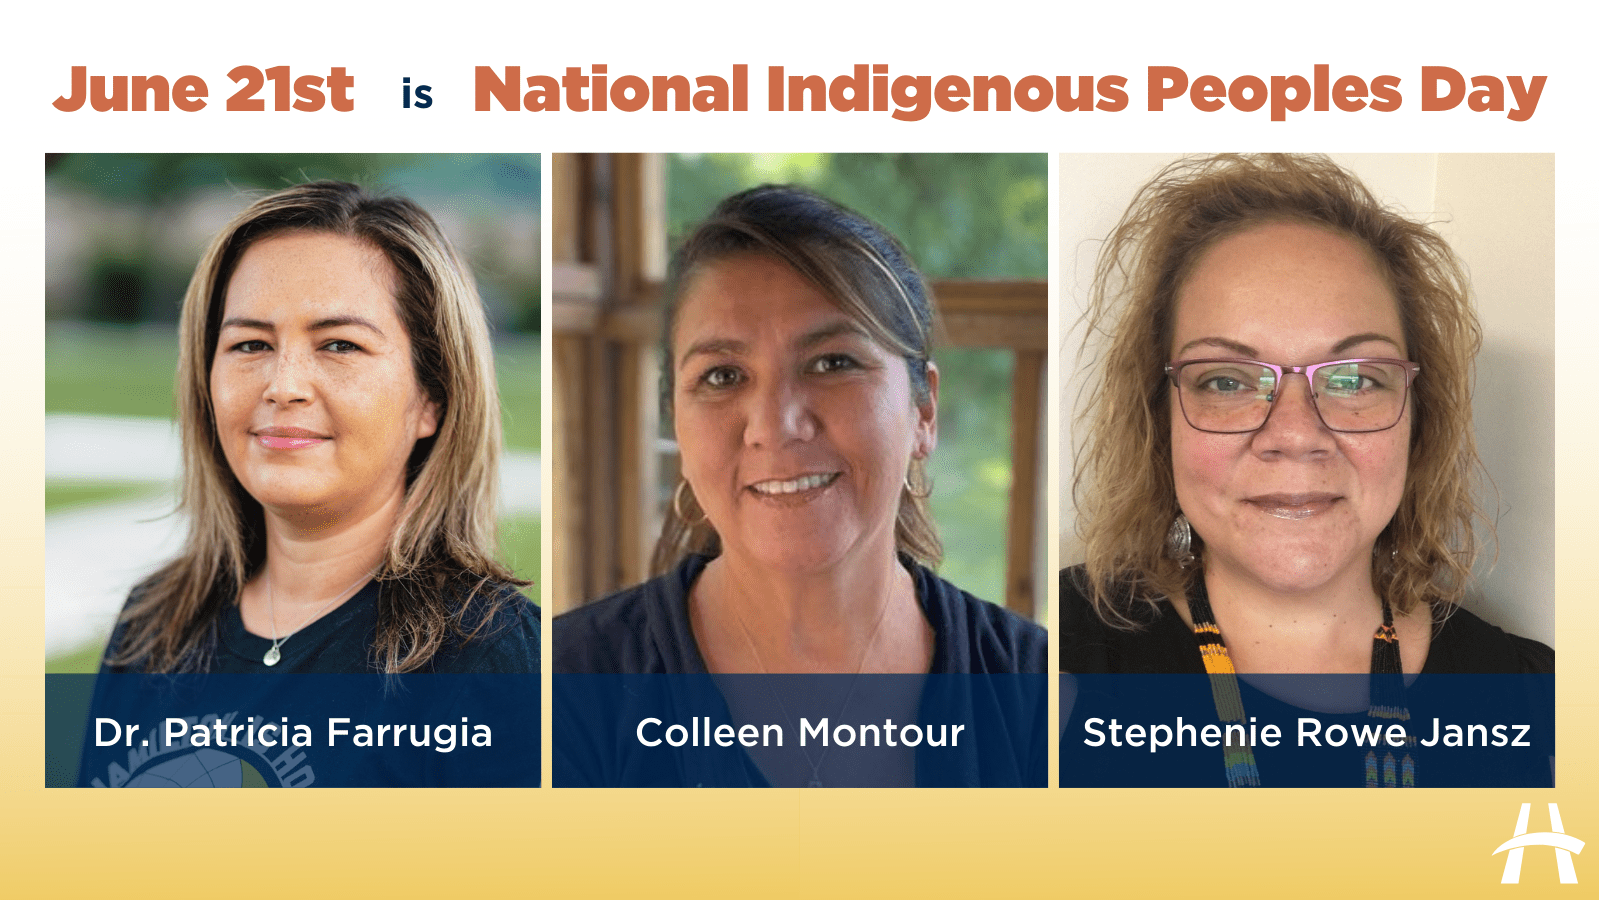 Collage showing doctor Patricia Farrugia, Colleen Montour, and Stephenie Rowe Jansz. Text at the top reads June 21 National Indigenous Peoples Day.